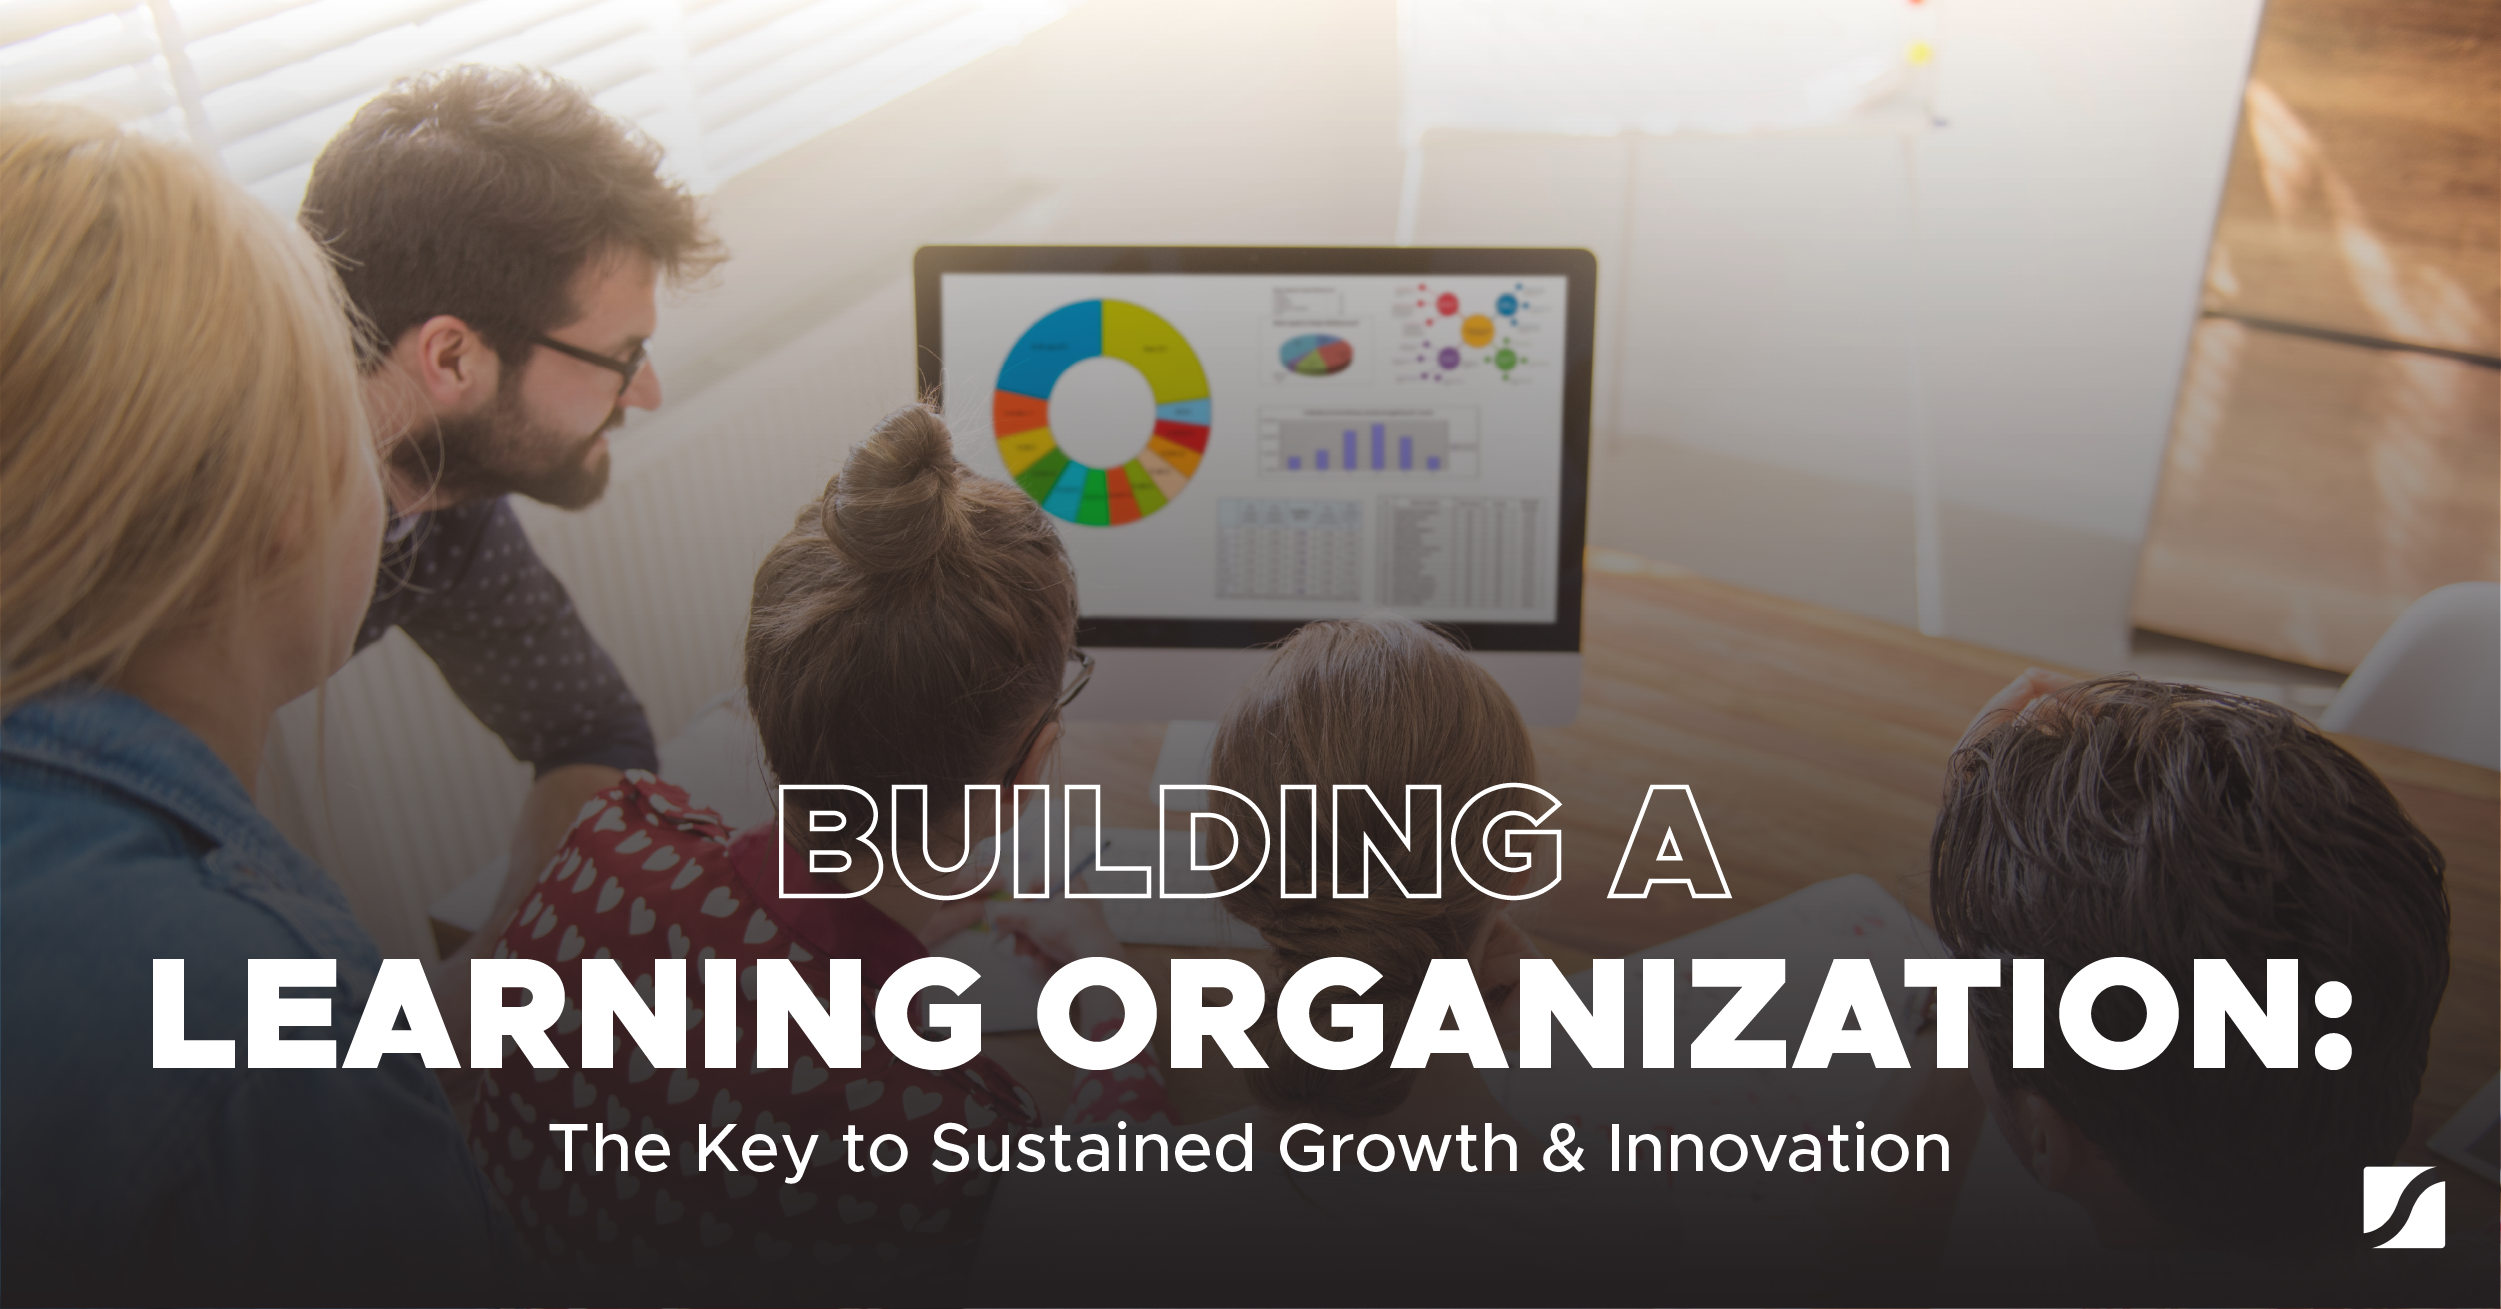 Building a Learning Organization: The Key to Sustained Growth & Innovation